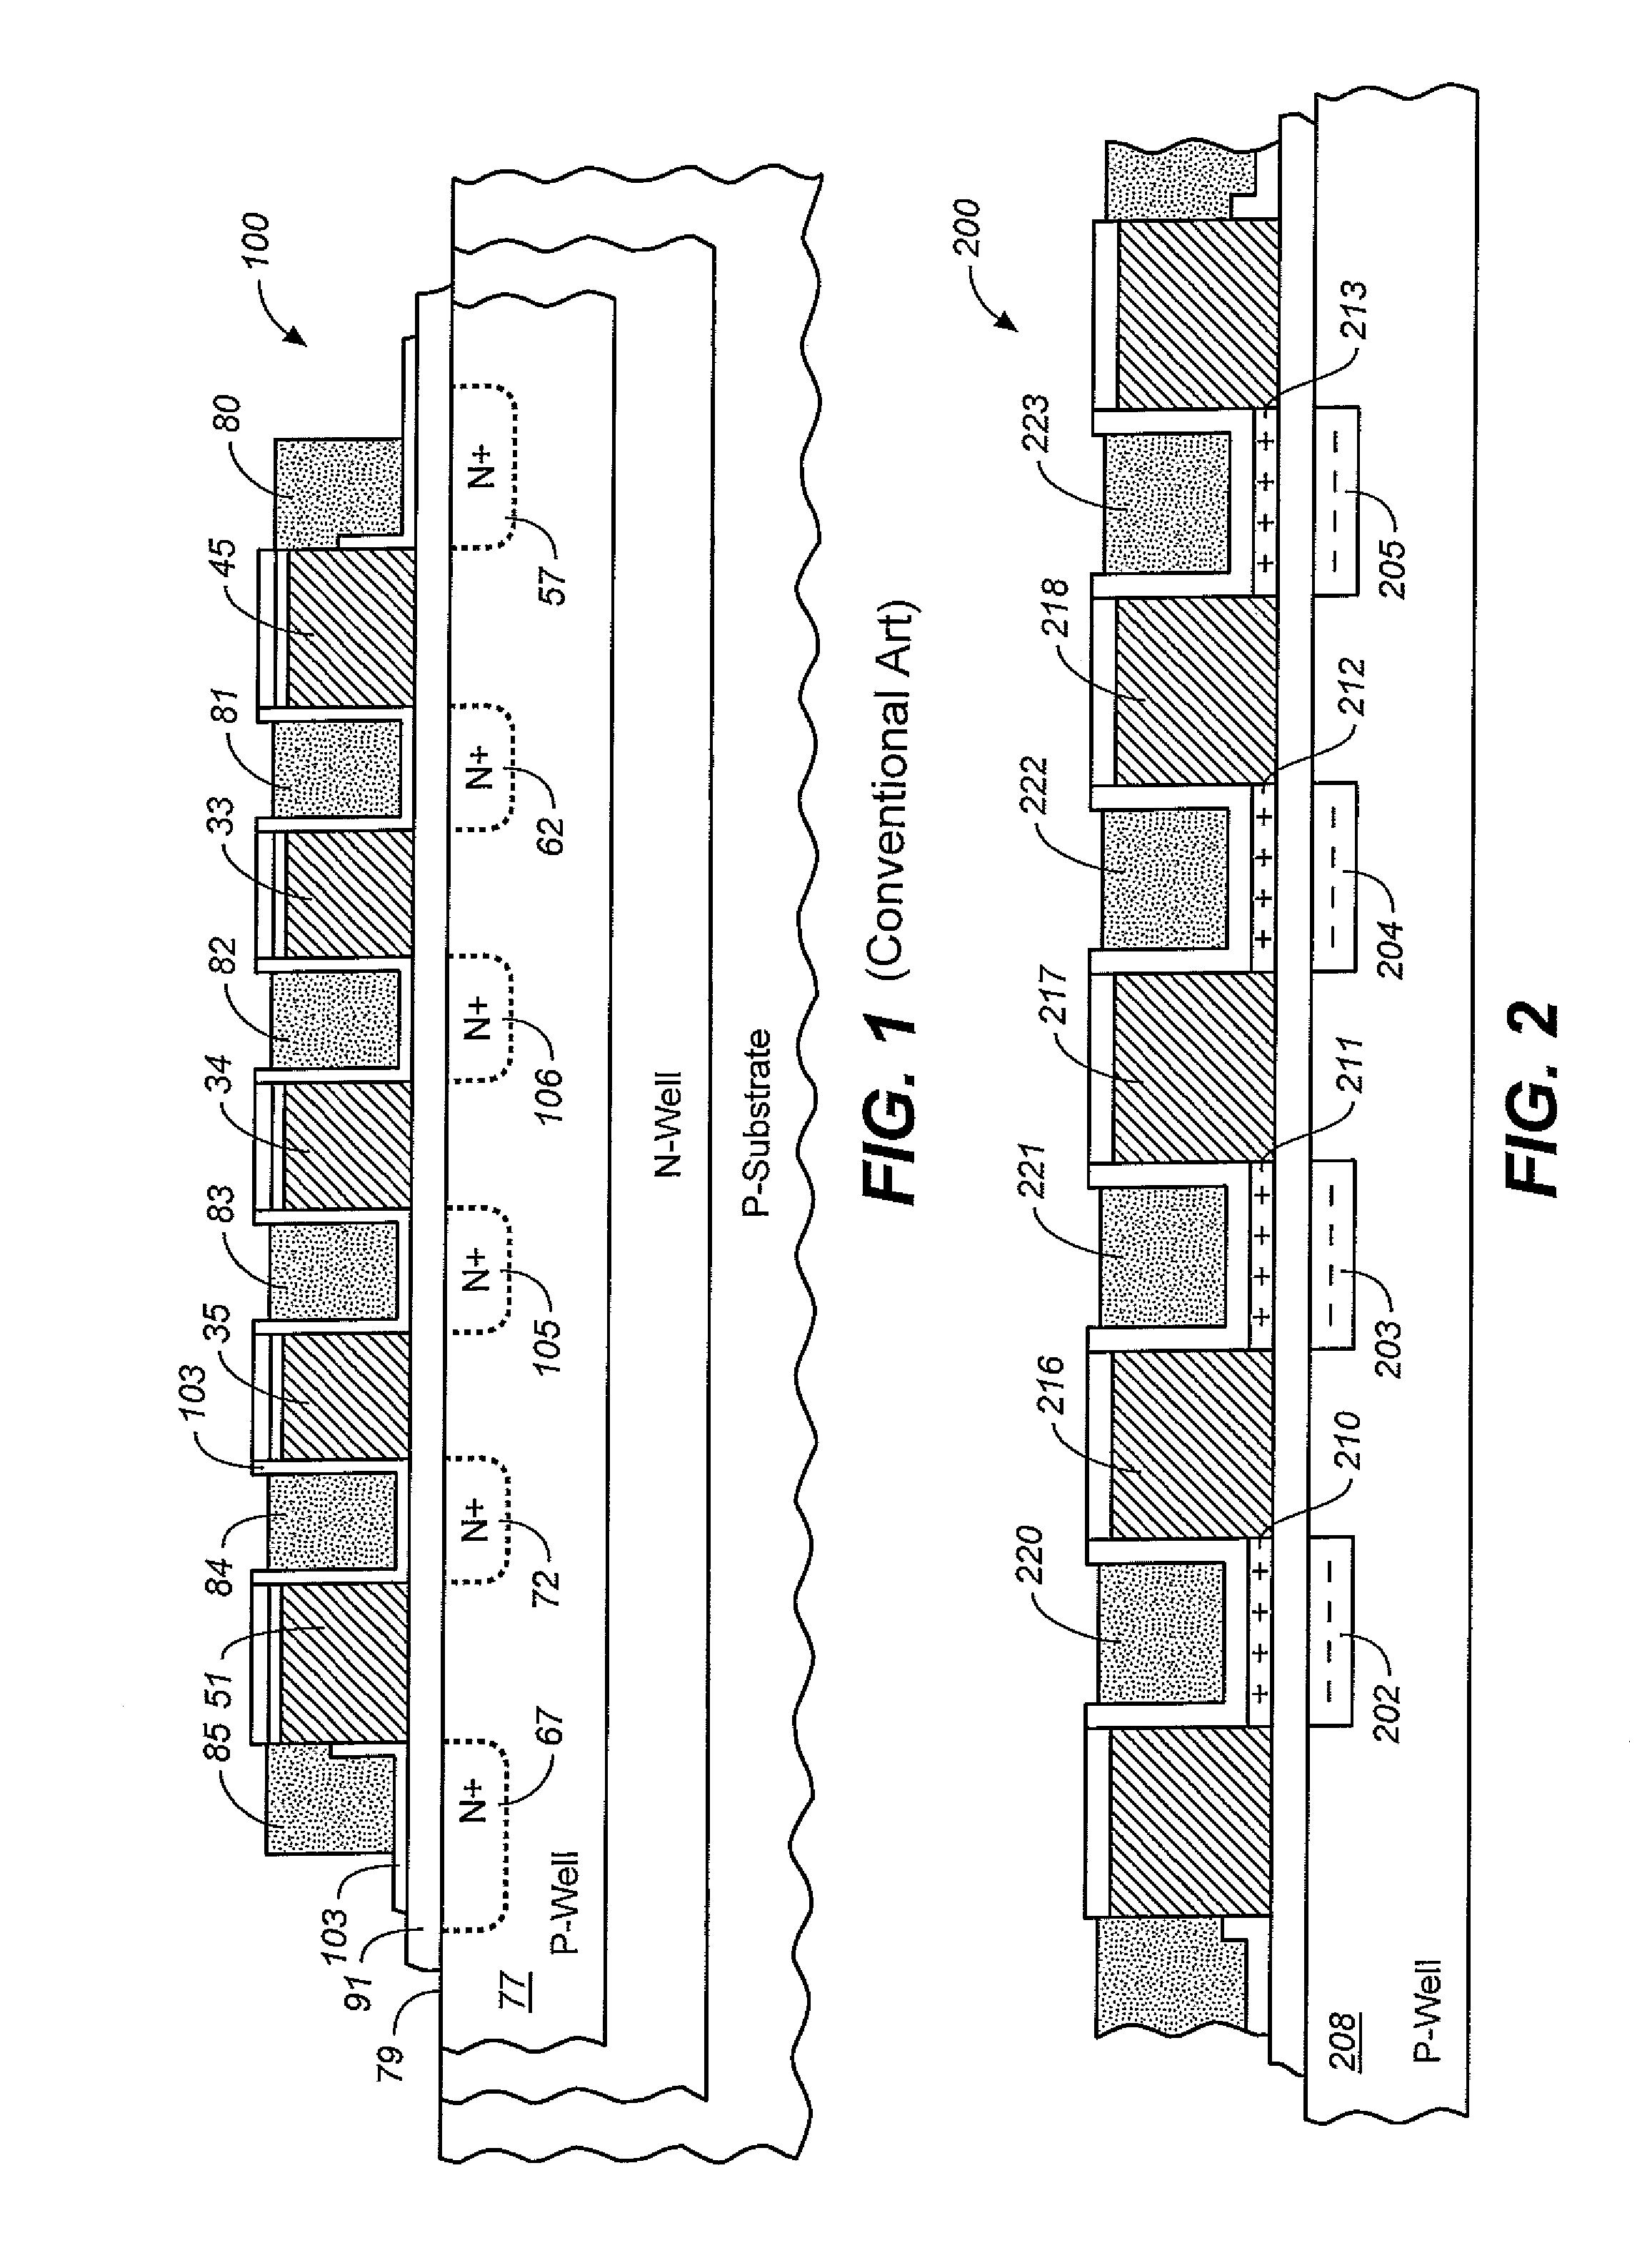 Methods of forming NAND memory with virtual channel